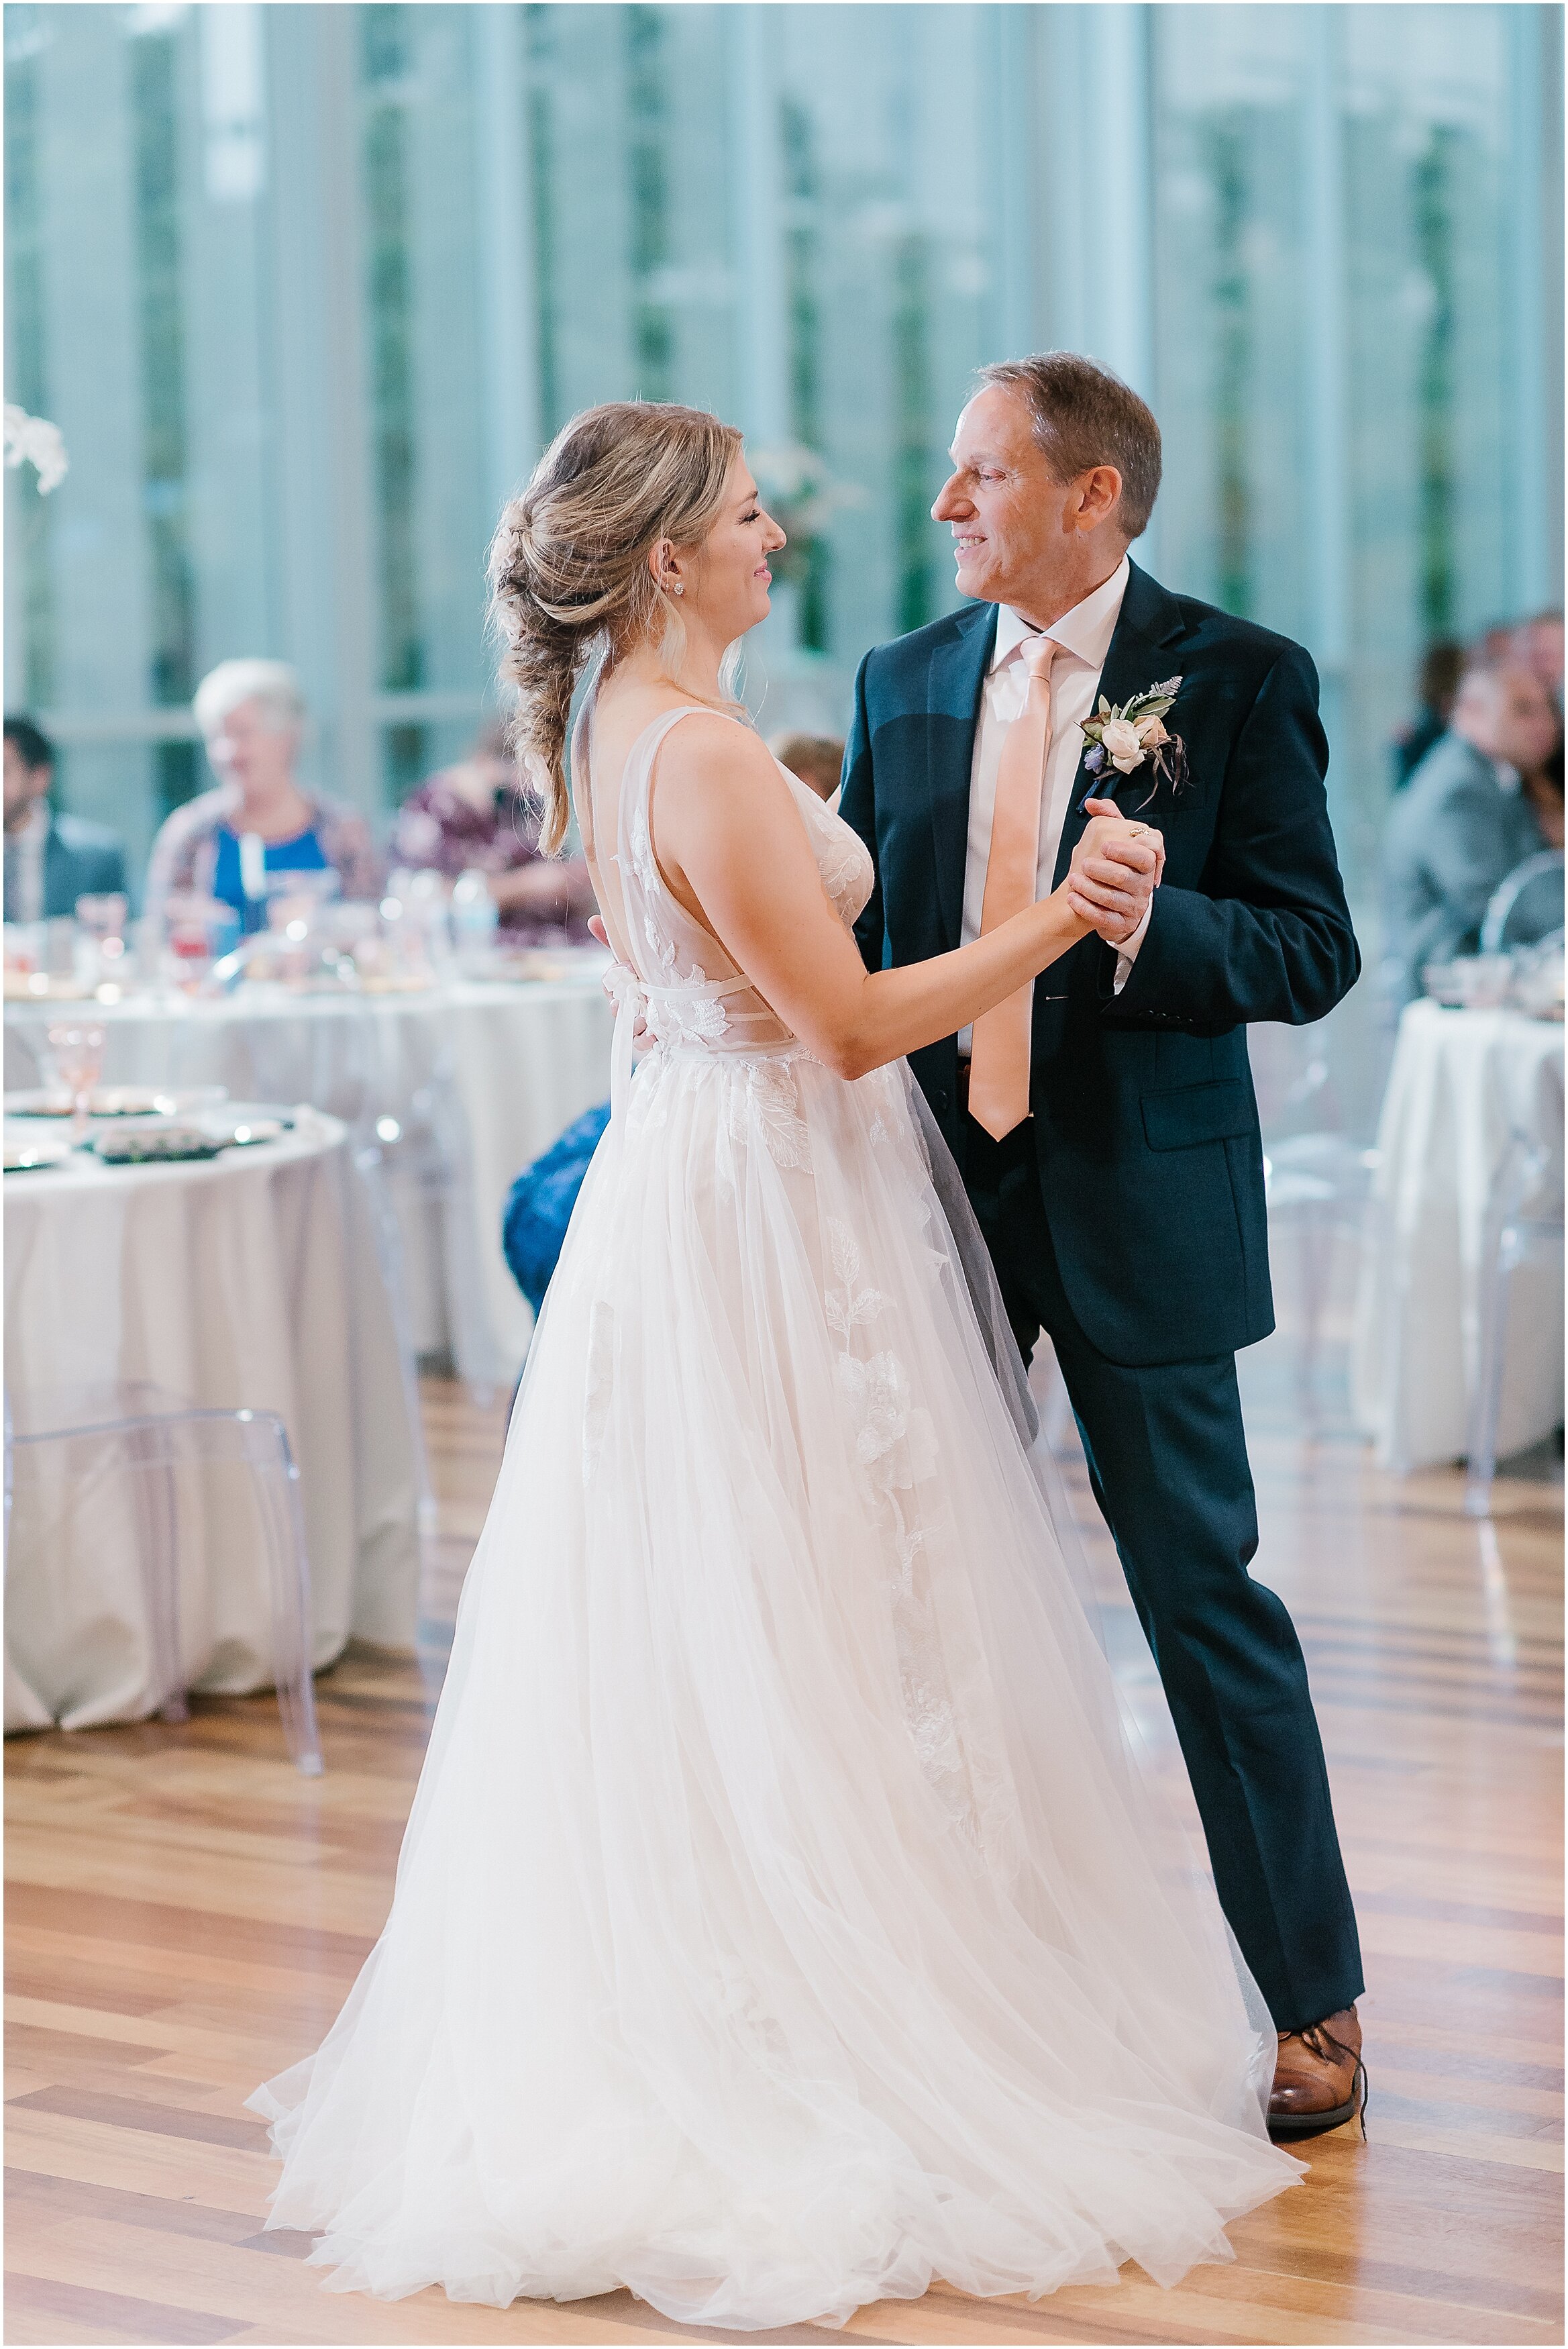 Rebecca Shehorn Photography Colleen and Kyle Inn at Irwin Gardens Wedding-952_The Commons Columbus Inn at Irwin Garden Indianapolis Wedding Photographer.jpg